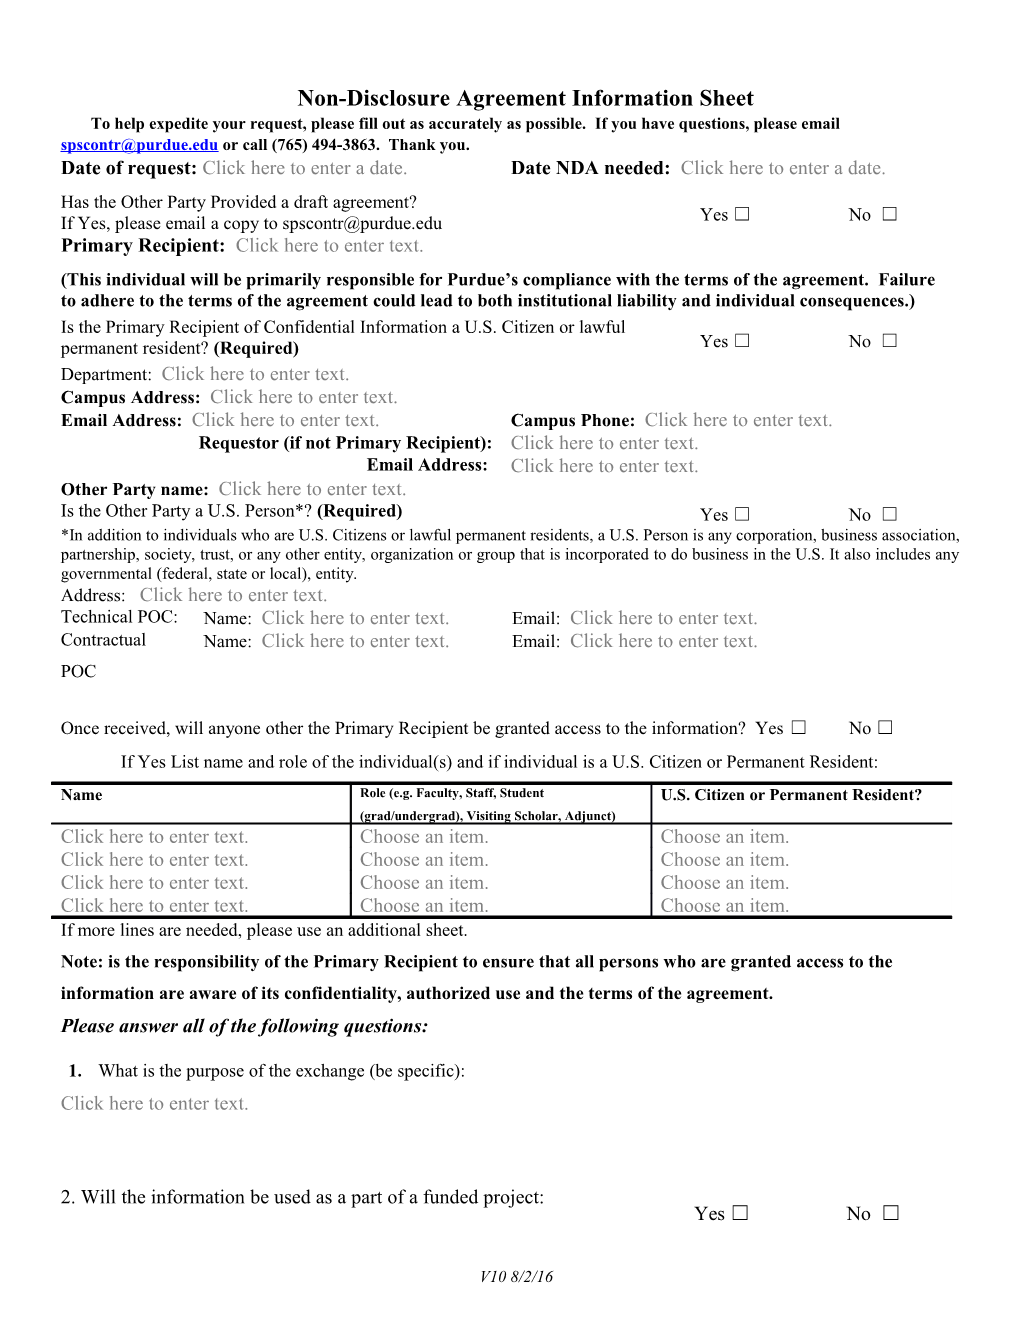 Non-Disclosure Agreement Information Sheet